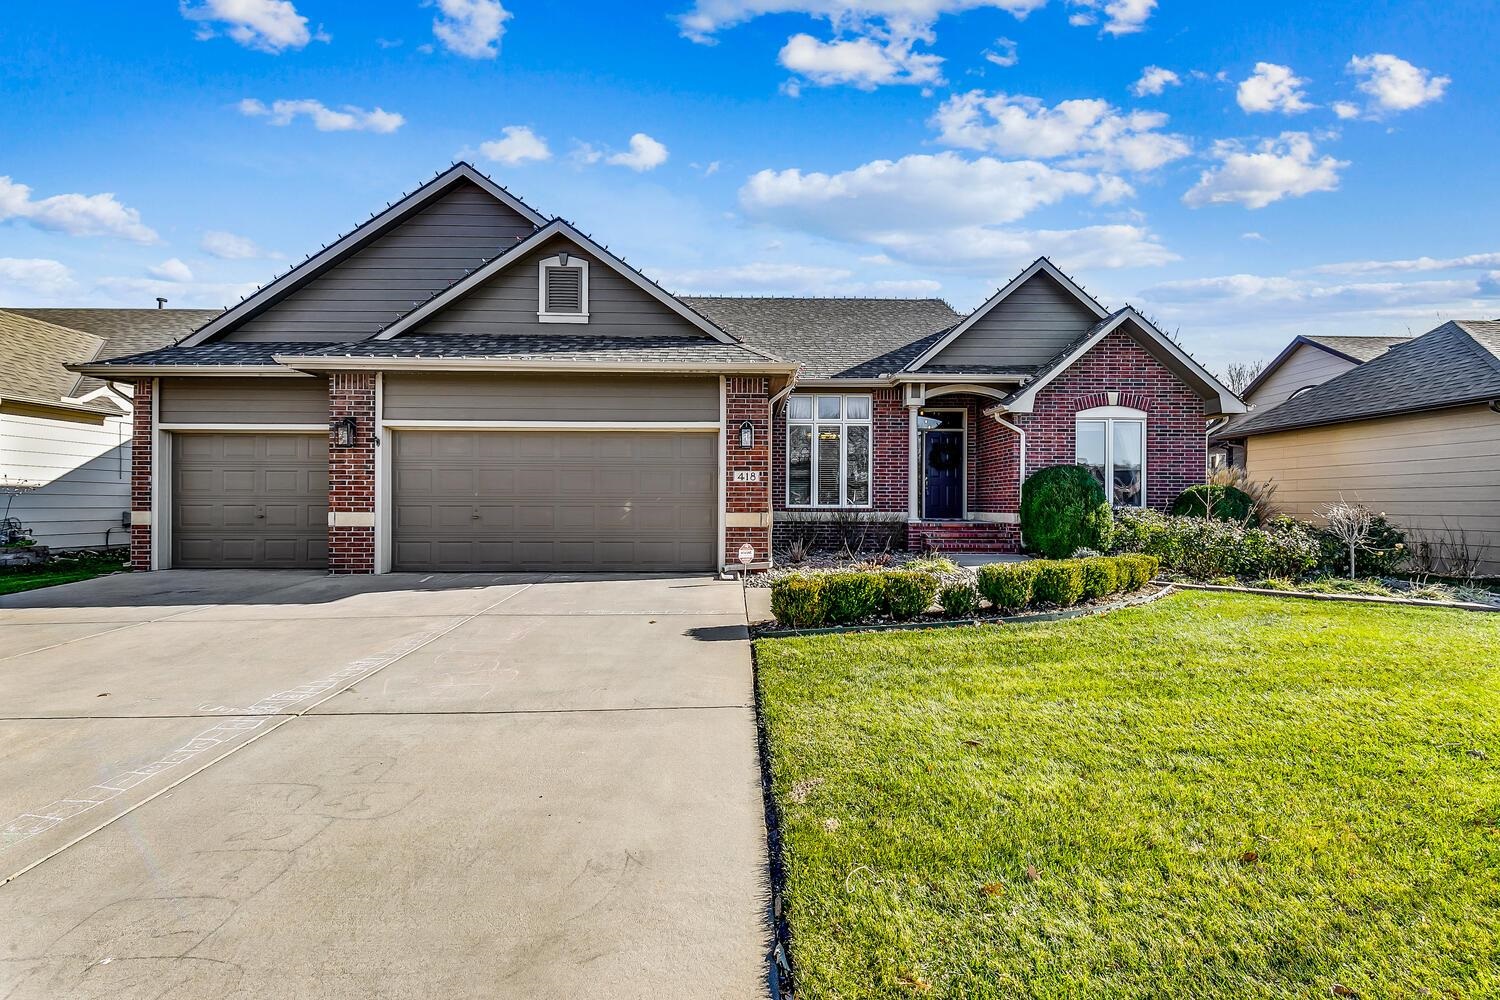 There's lots of space to spread out in this 5 bedroom, 3 bath home!  Walk in the front door into the